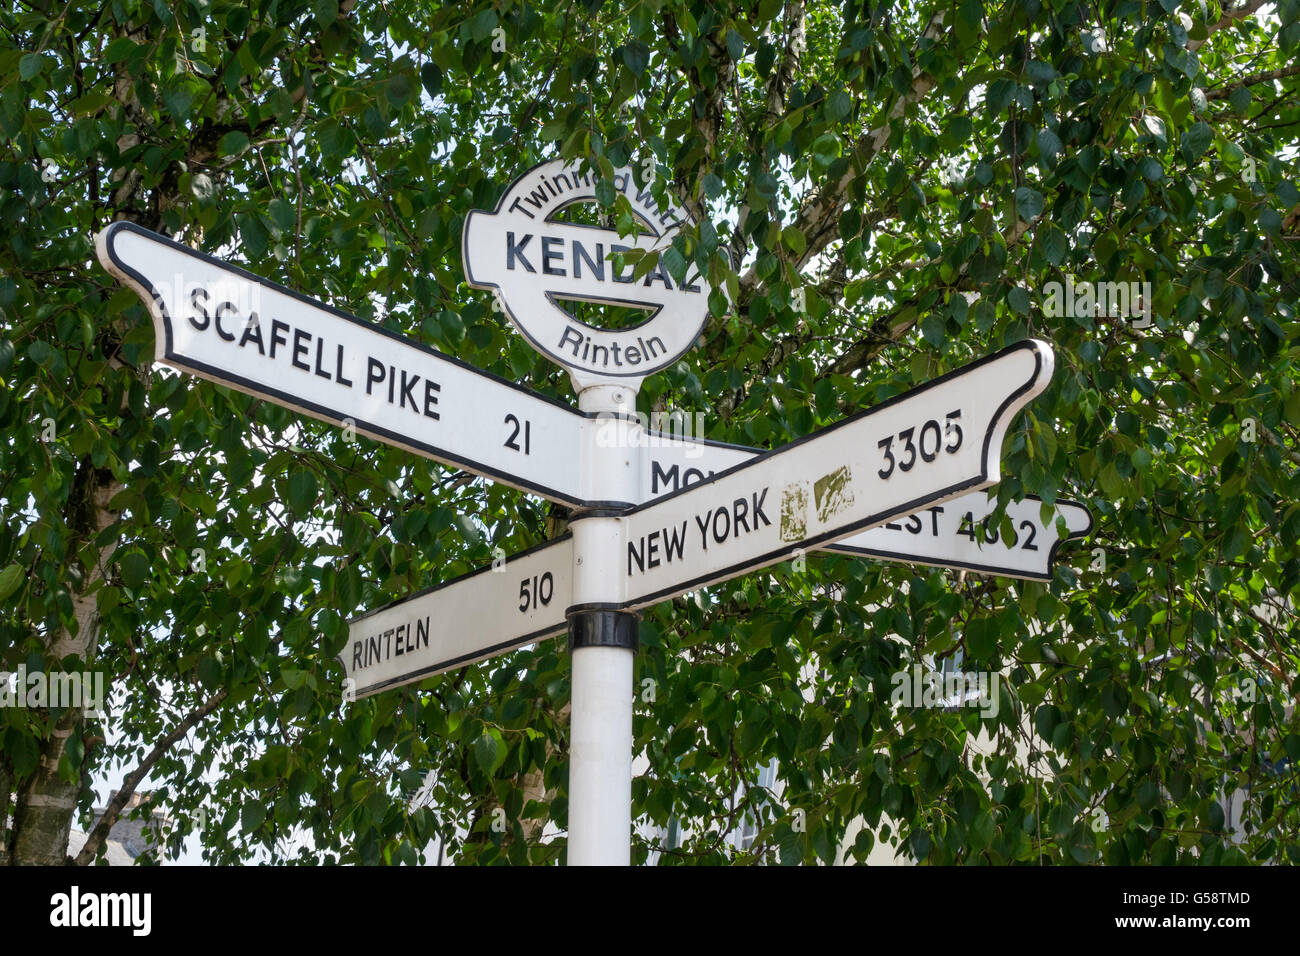 Sign Post in town centre of Kendal Cumbria twinned with Rinteln German distances to Rinteln New York Mount Everest Scafell Pike Stock Photo